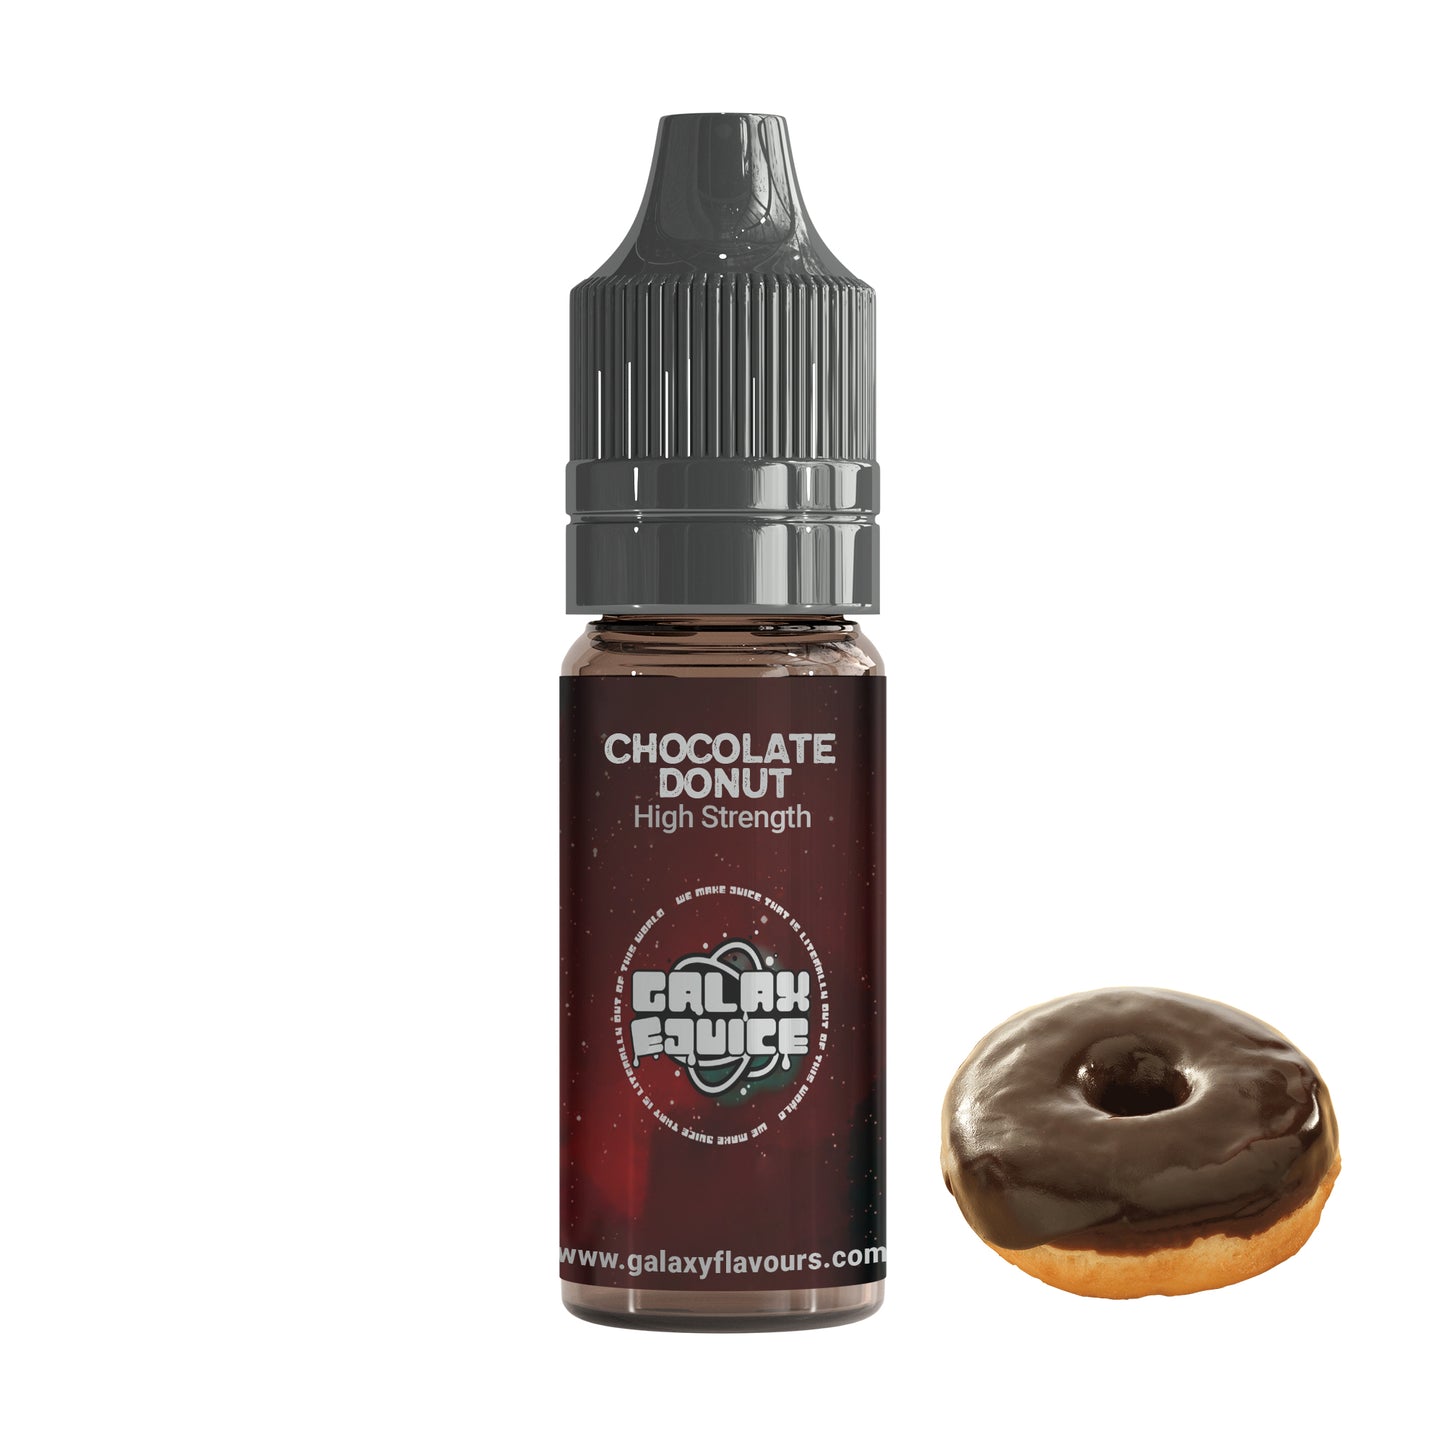 Chocolate Glazed Donut High Strength Professional Flavouring.